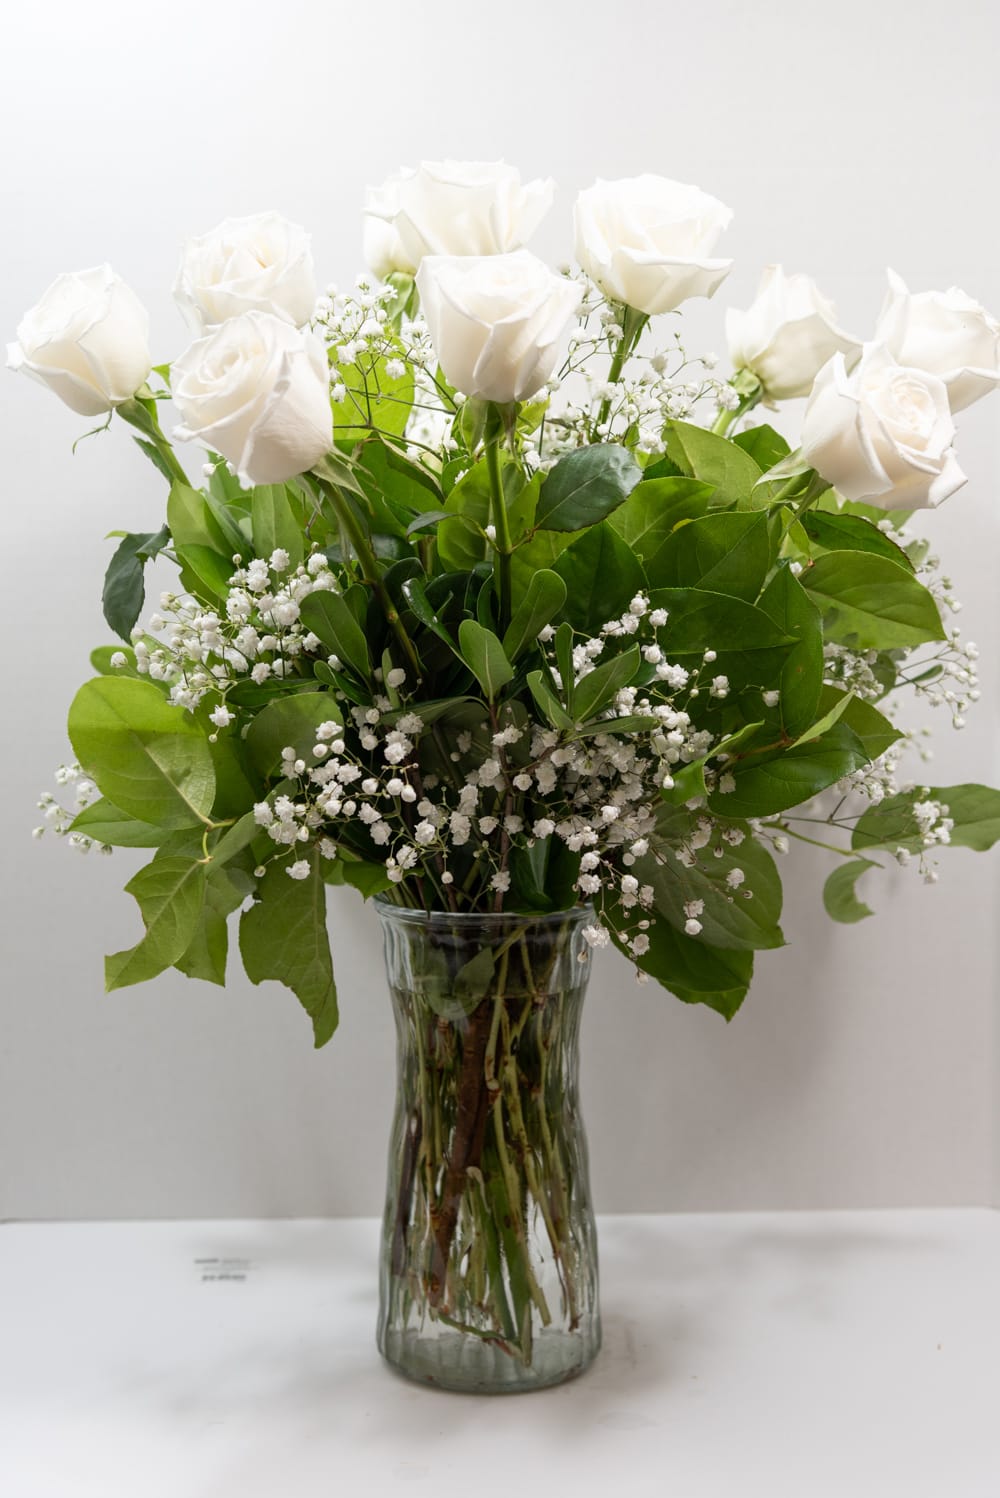 Dozen White Roses - A graceful bouquet of white roses, framed by baby's-breath filler. The sophisticated white color is ideal for expressing innocence, purity, reverence or remembrance. Also known as bridal roses, white roses are an enchanting option for a traditional wedding. If you would like 1 &amp; 1/2 dozen roses upgrade to deluxe if you would like 2 dozen please select premium. 